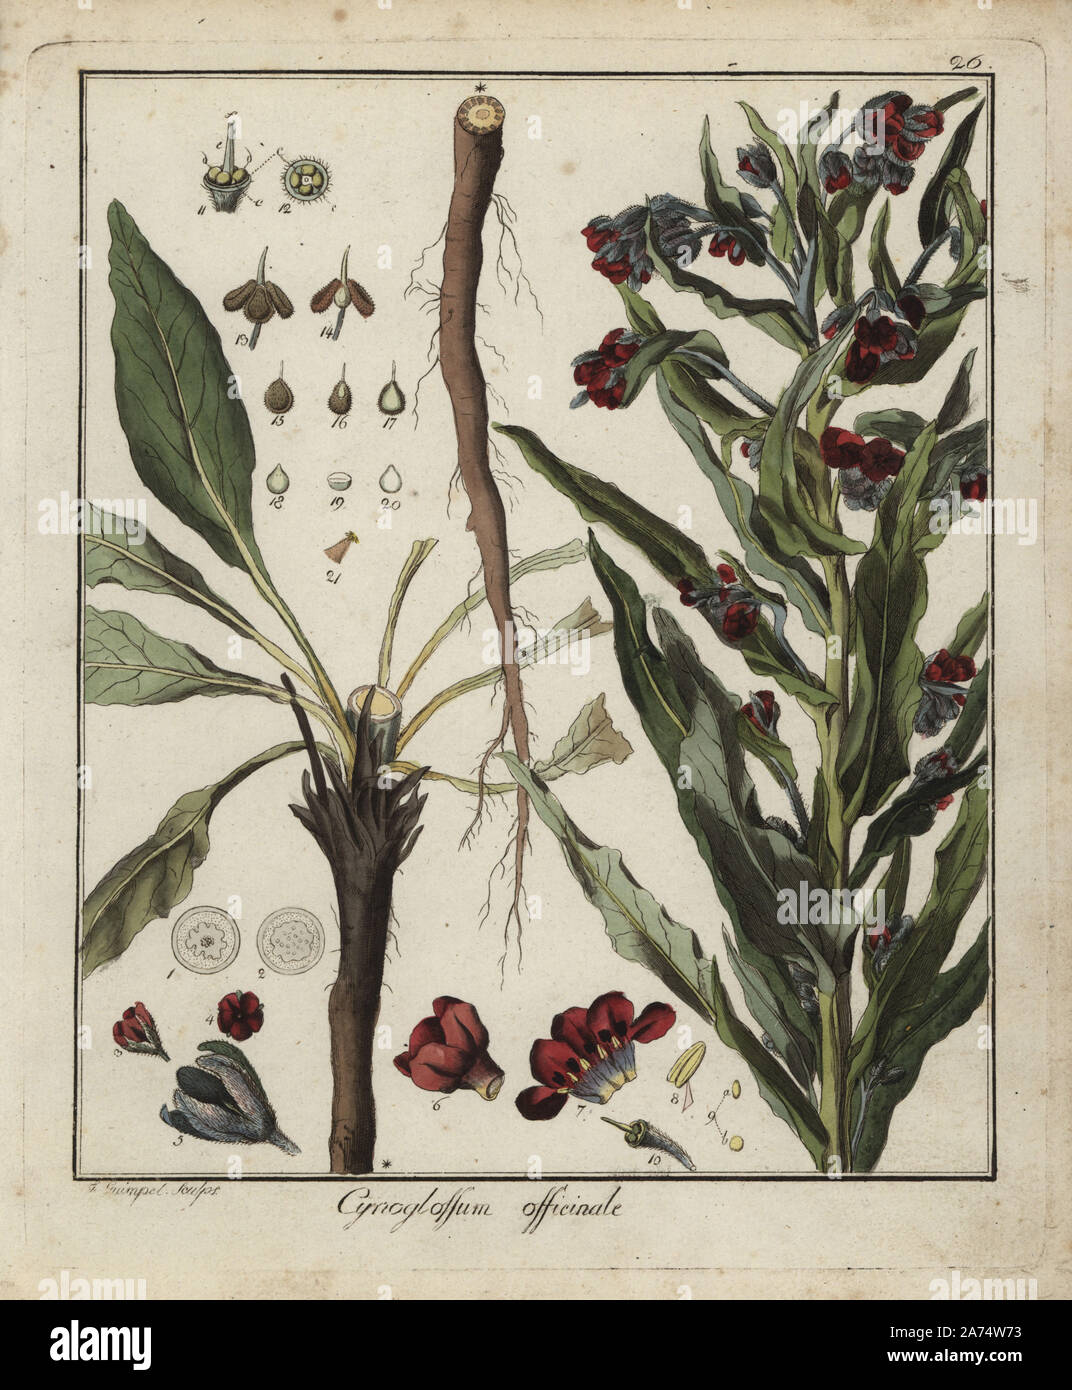 Houndstongue, Cynoglossum officinale. Handcoloured copperplate engraving by F. Guimpel from Dr. Friedrich Gottlob Hayne's Medical Botany, Berlin, 1822. Hayne (1763-1832) was a German botanist, apothecary and professor of pharmaceutical botany at Berlin University. Stock Photo